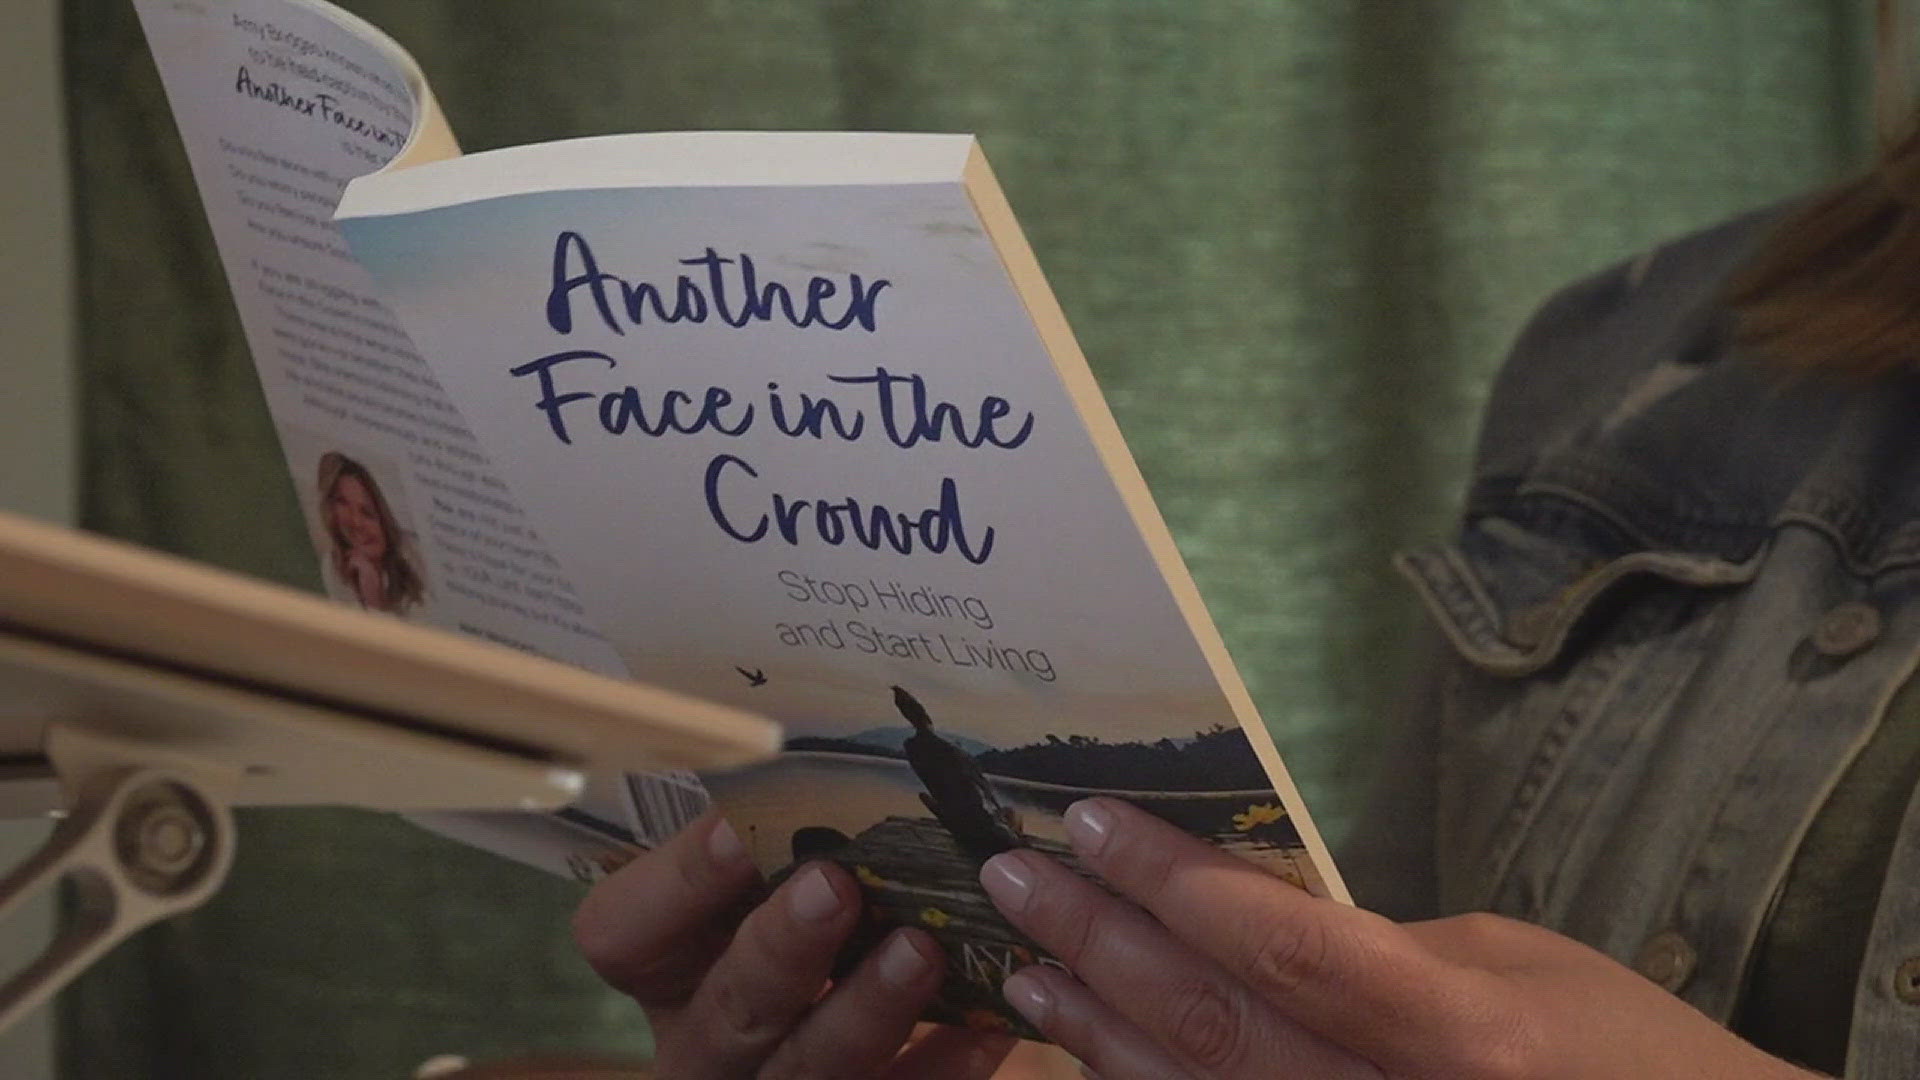 Amy Bridges, of Beaumont, wrote and had her first book, “Another Face in the Crowd,” published and released this past month.